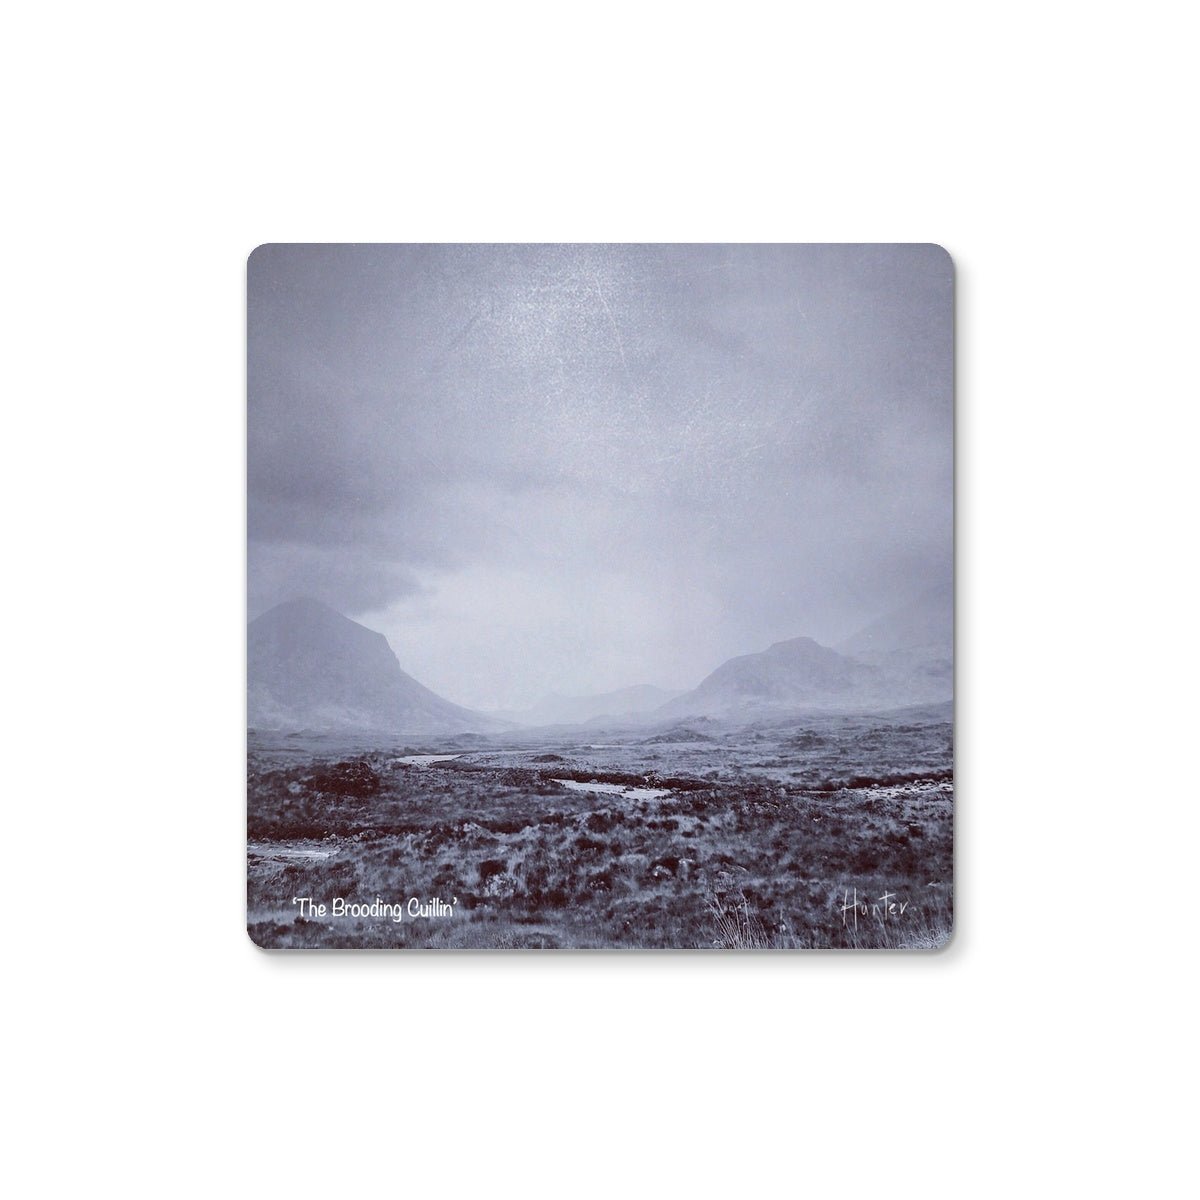 The Brooding Cuillin Skye Art Gifts Coaster-Coasters-Skye Art Gallery-6 Coasters-Paintings, Prints, Homeware, Art Gifts From Scotland By Scottish Artist Kevin Hunter